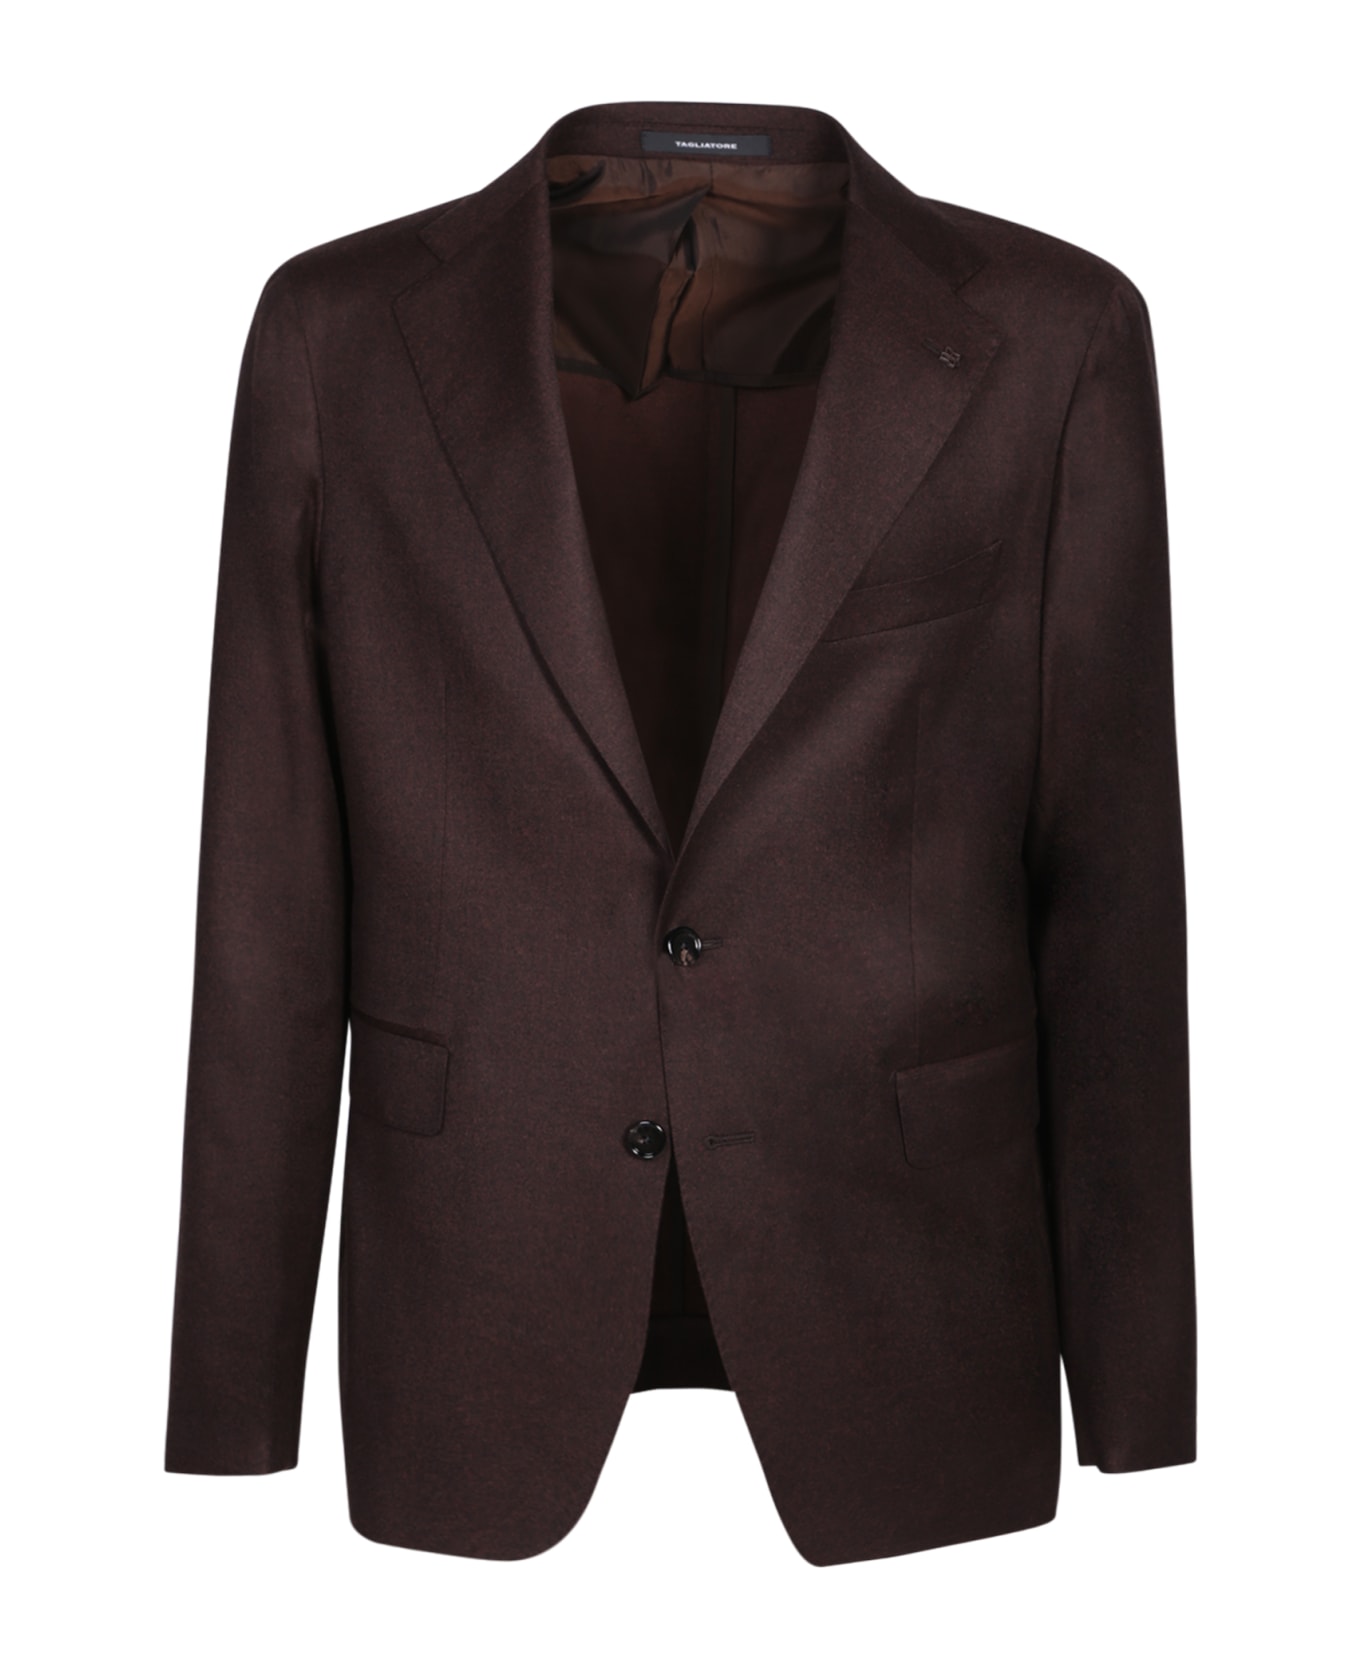 Tagliatore Single-breasted Brown Suit - Brown スーツ